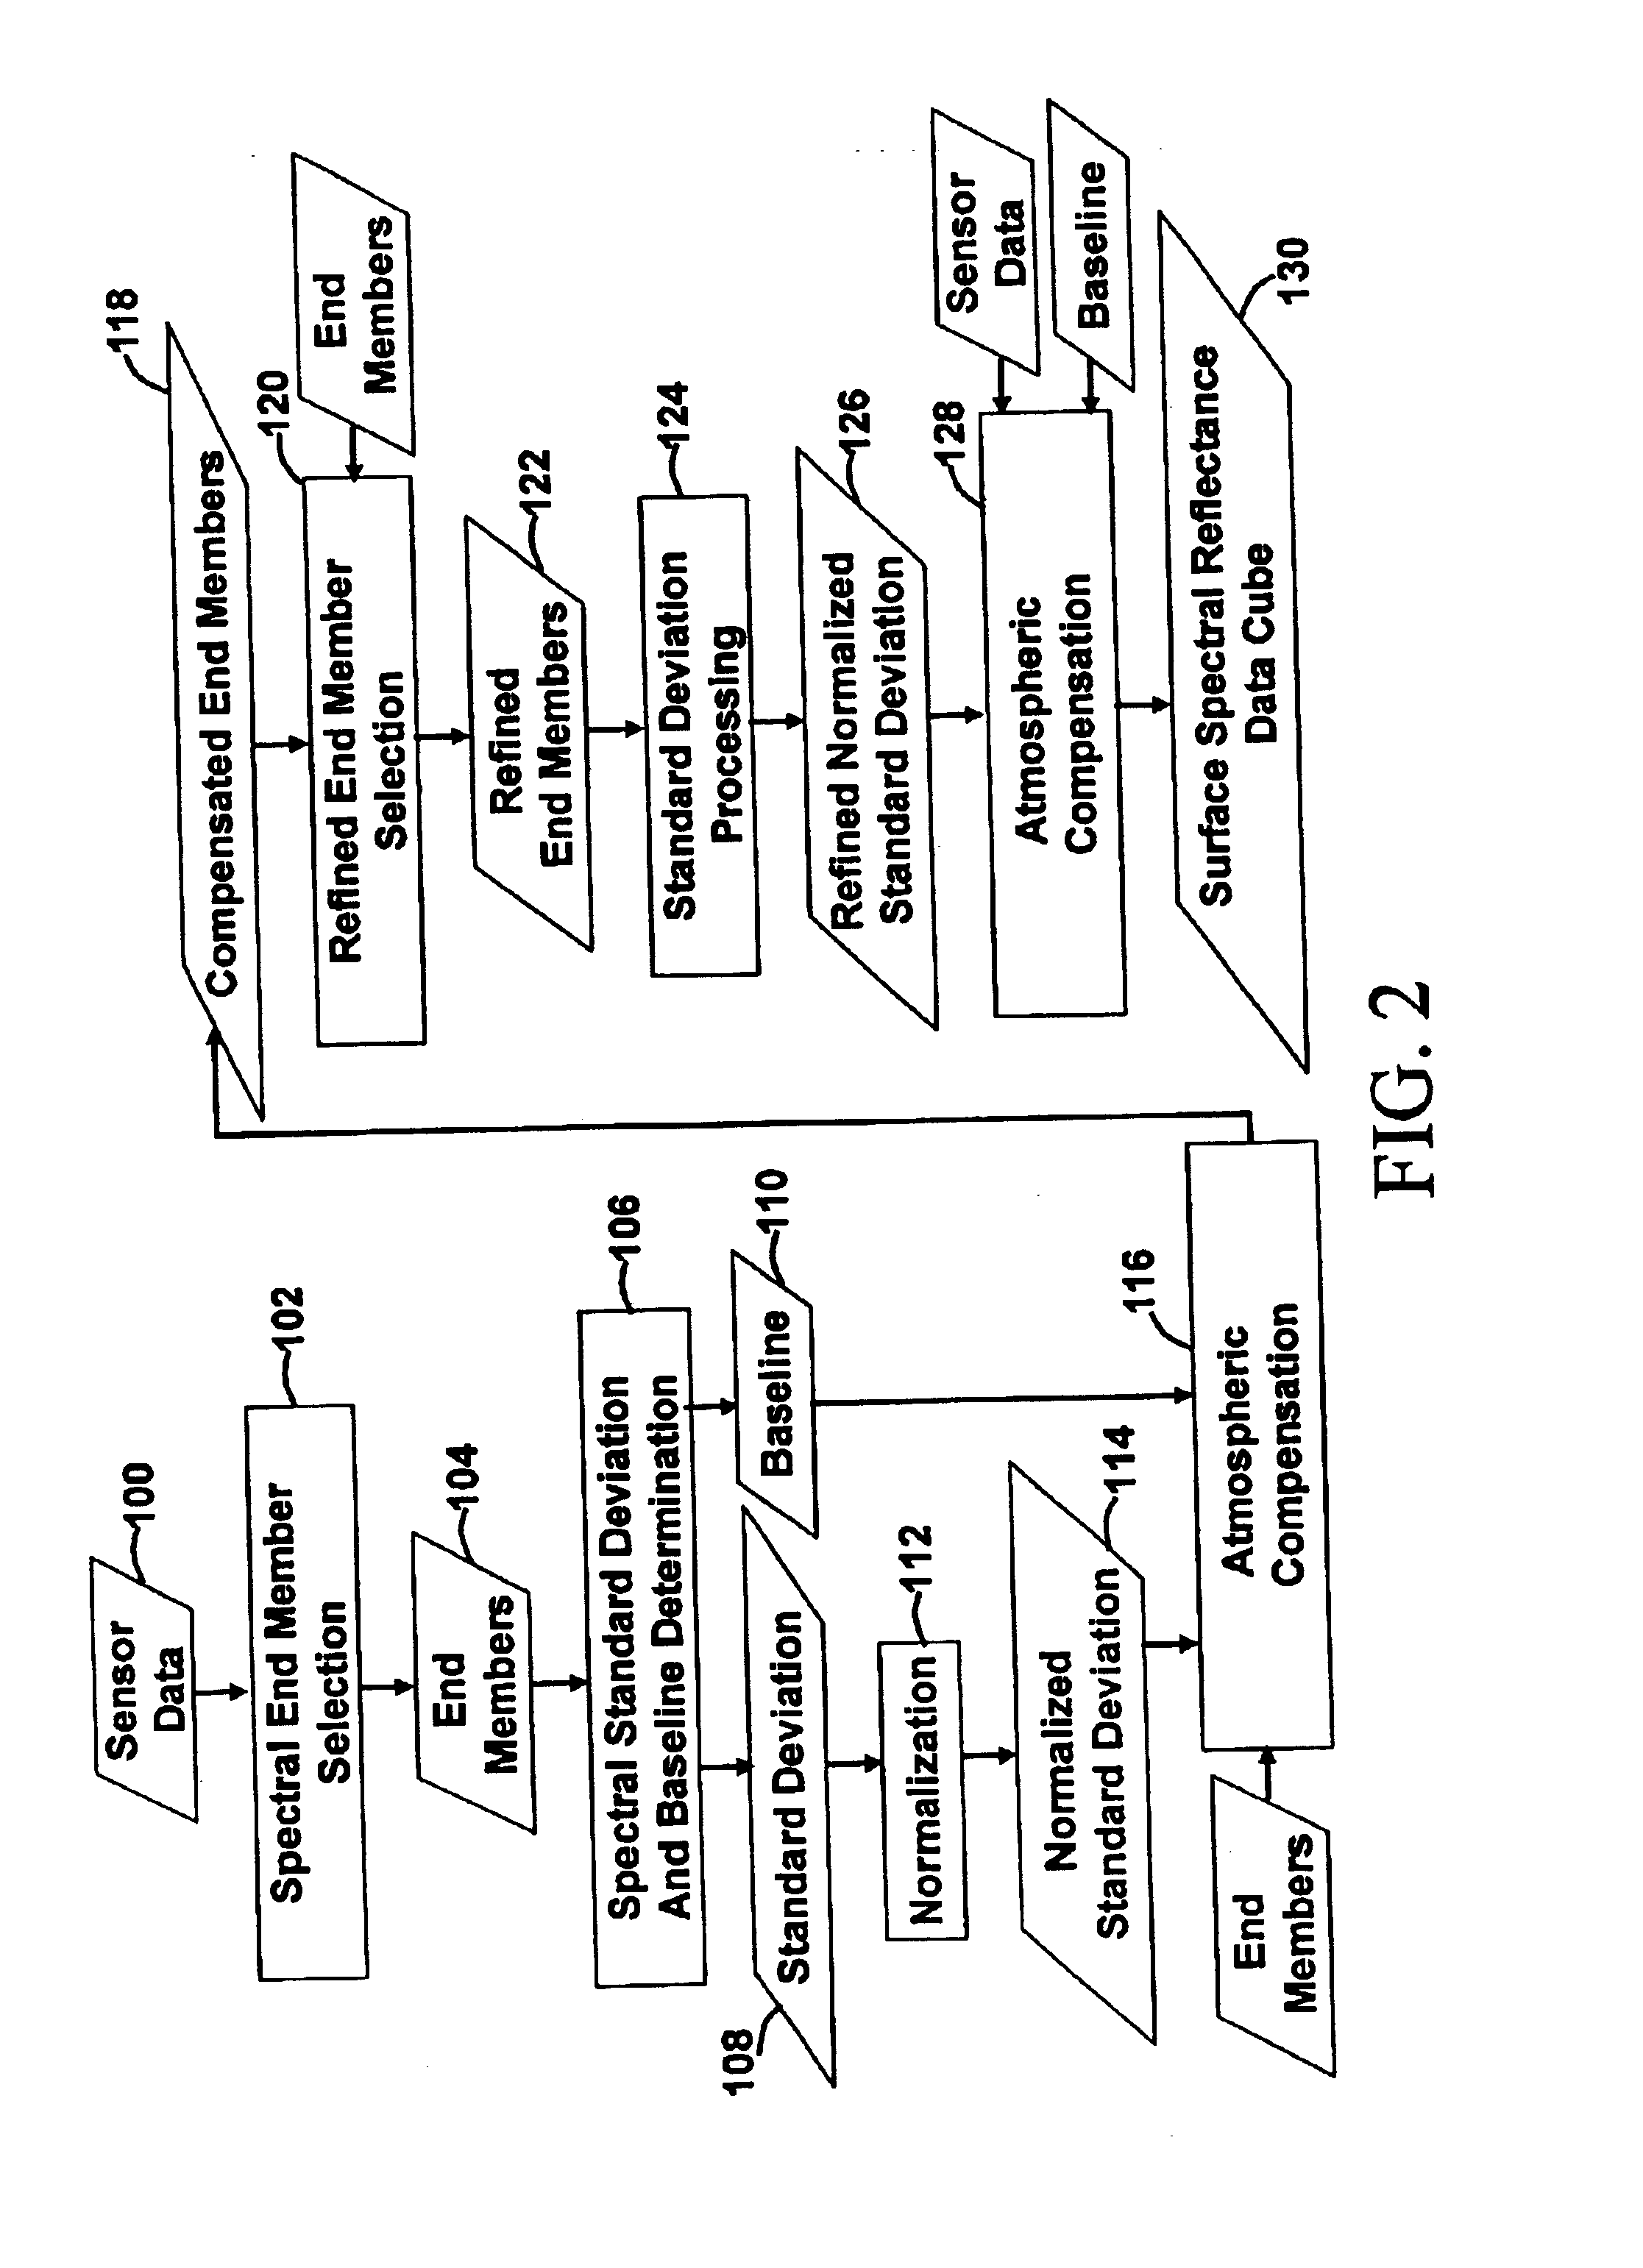 Method for performing automated in-scene based atmospheric compensation for multi-and hyperspectral imaging sensors in the solar reflective spectral region